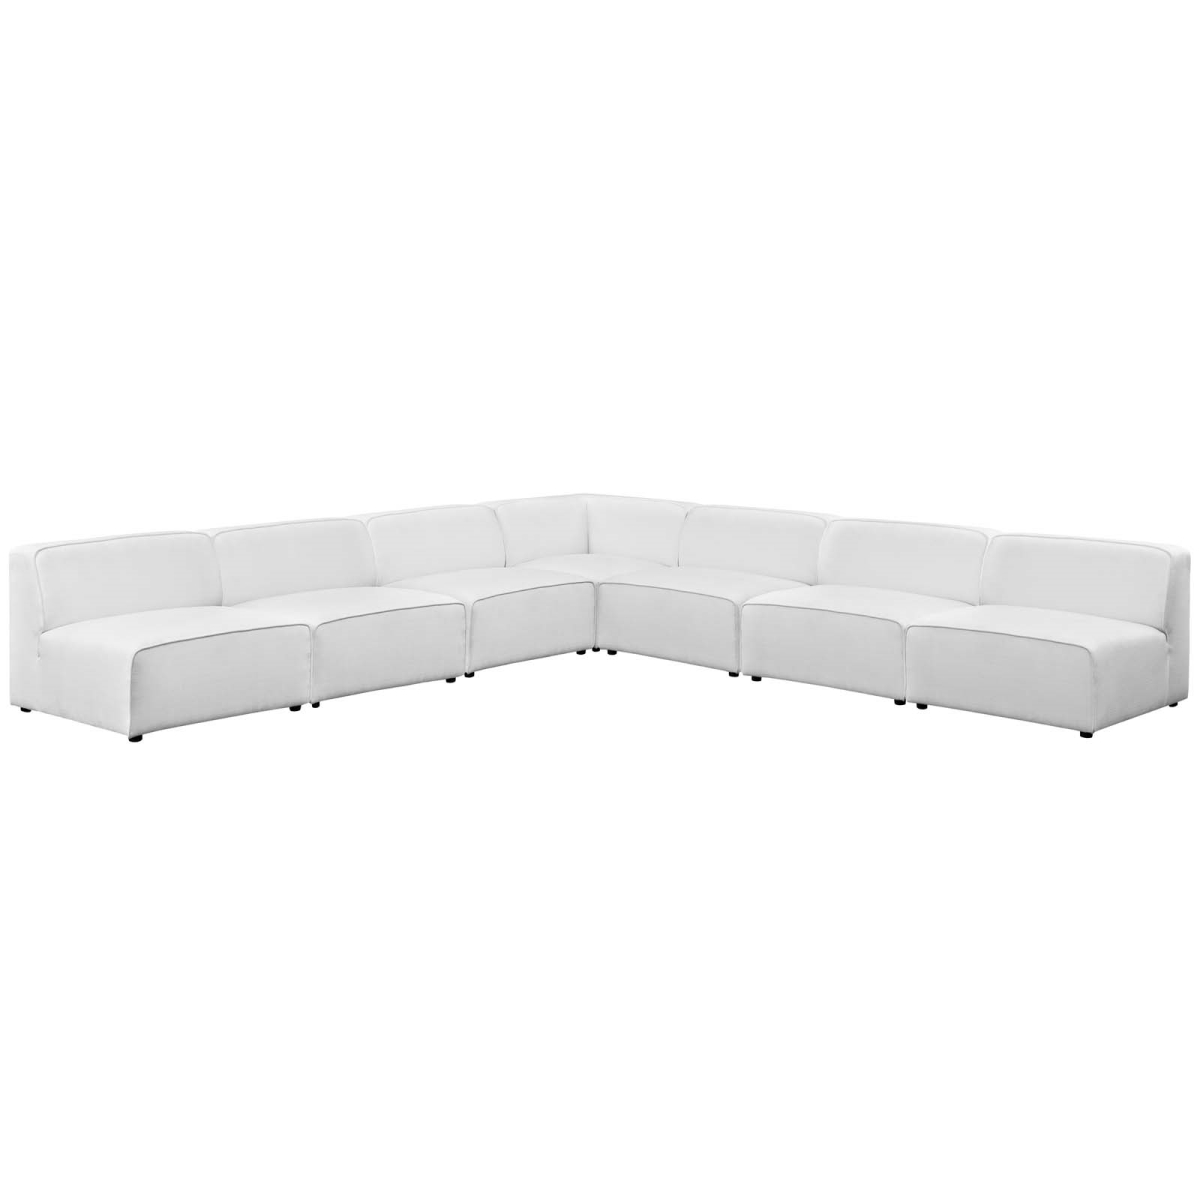 Eei-2841-whi 7 Piece Mingle Upholstered Fabric Sectional Sofa Set - White, 27 X 140.5 X 140.5 In.